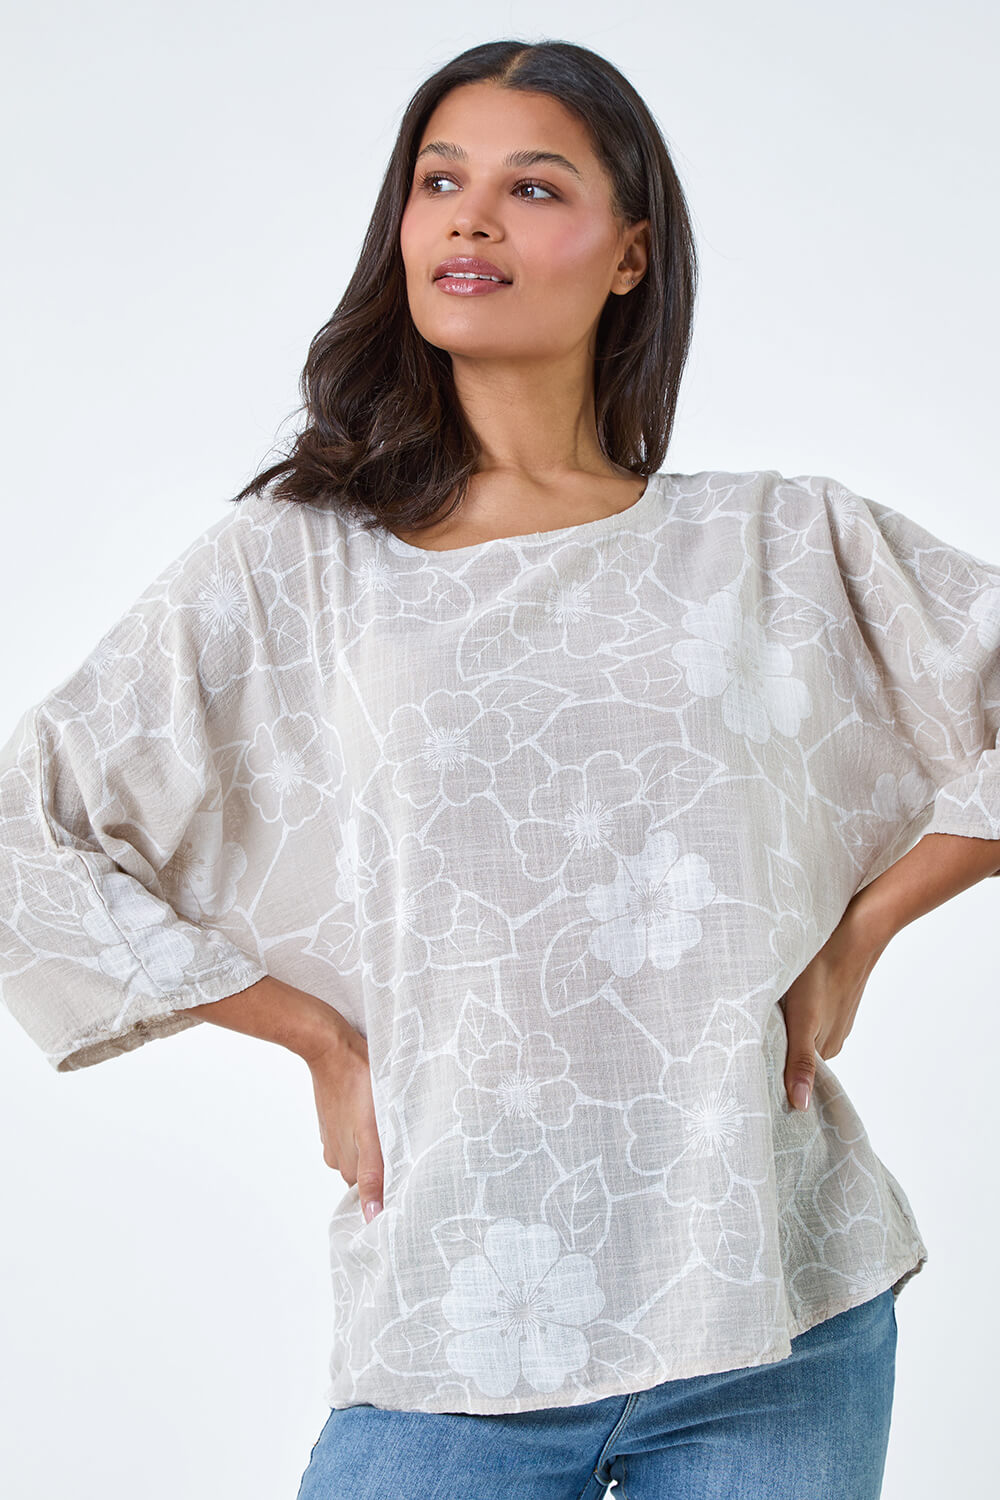 Stone Floral Print Cotton Tunic Top, Image 2 of 5